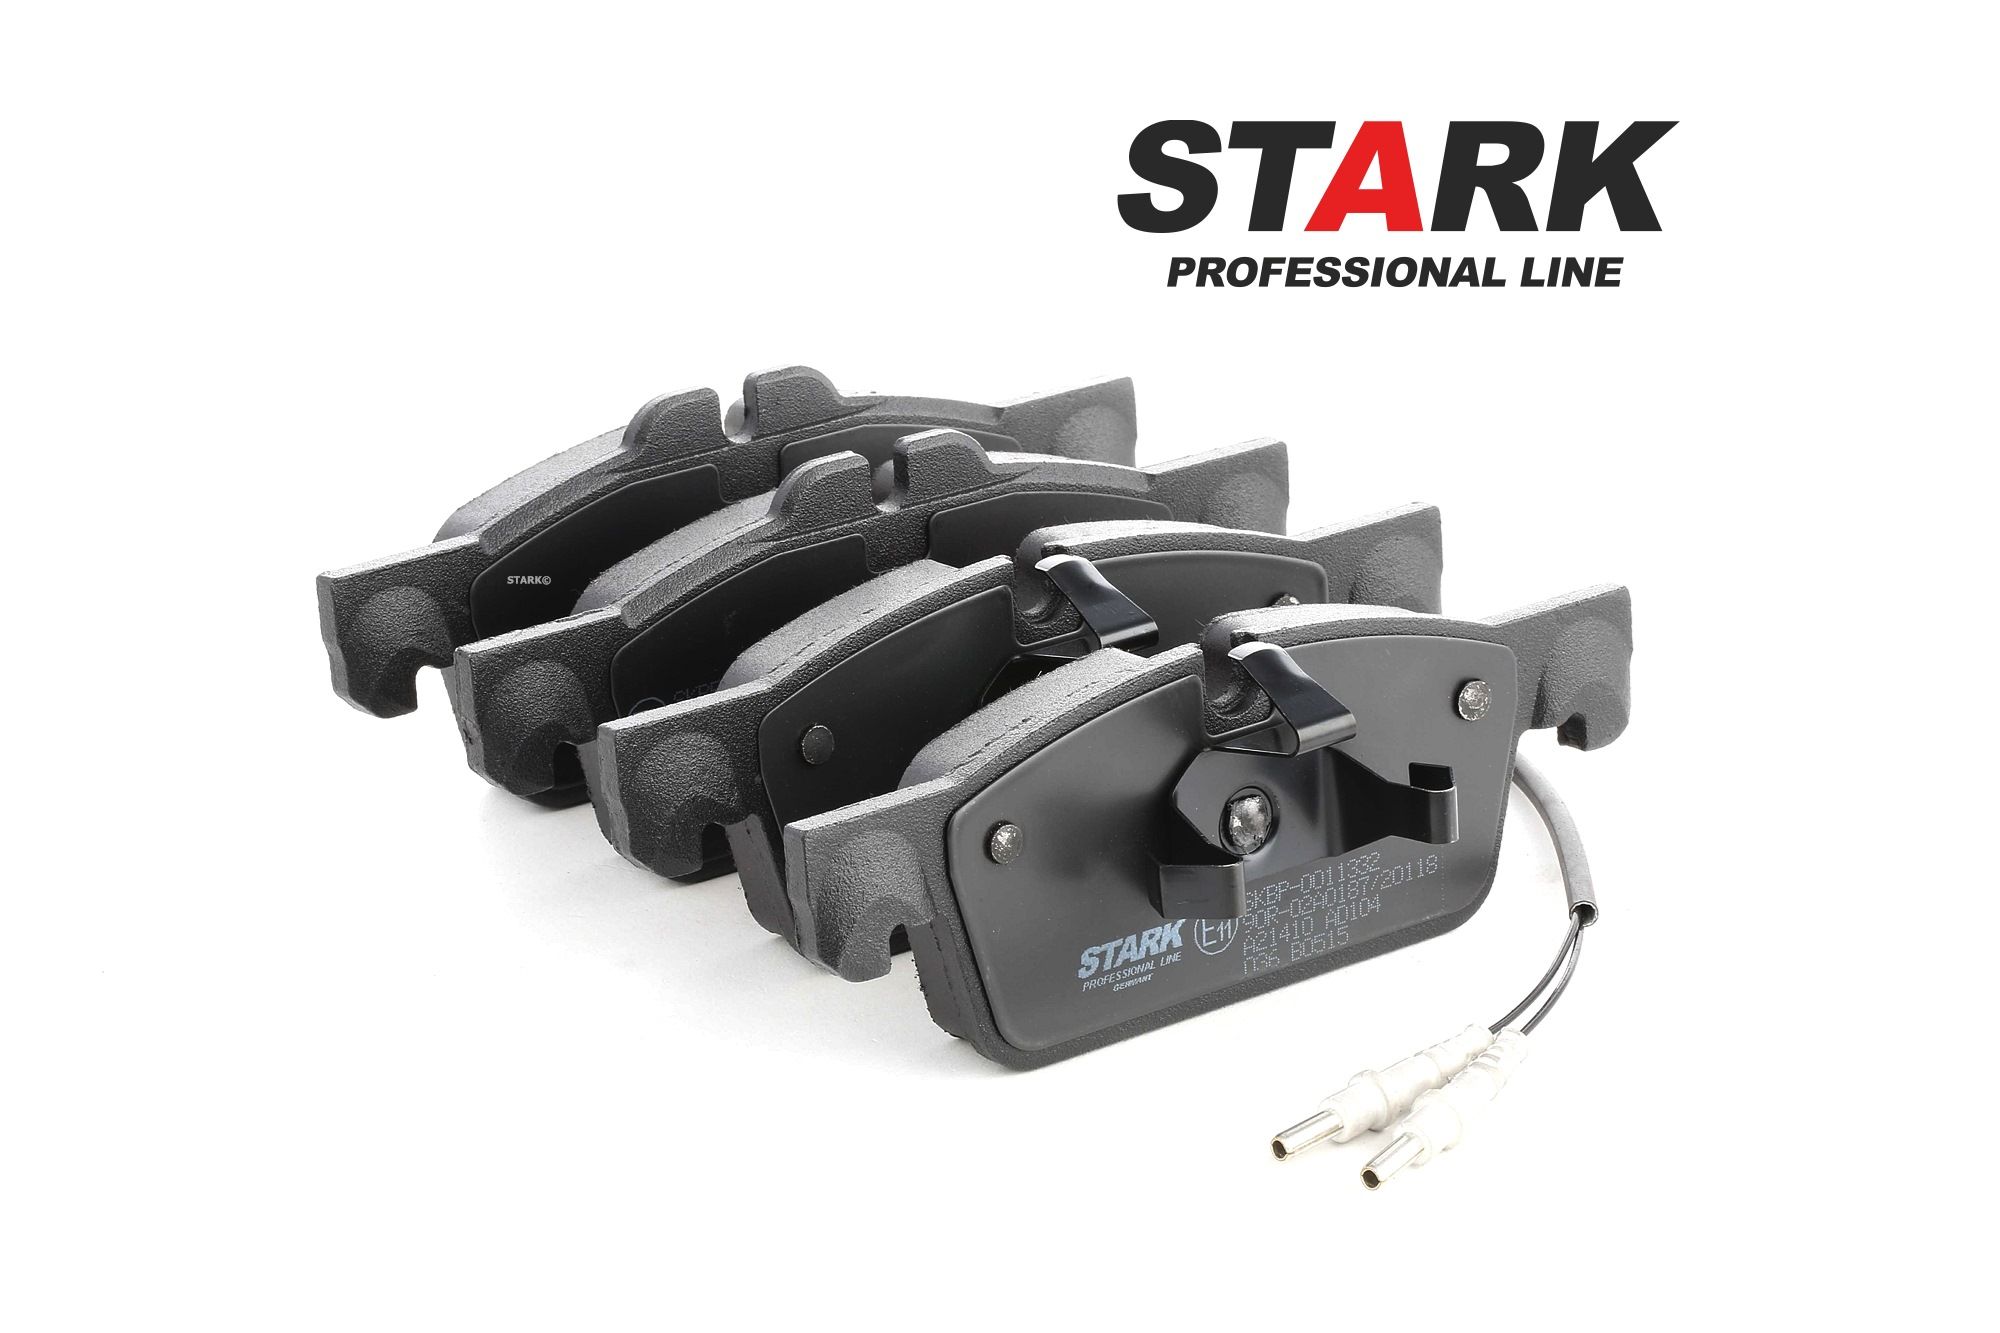 STARK Front Axle, incl. wear warning contact, with piston clip Height 1: 55mm, Height 2: 60,3mm, Width: 155,1mm, Thickness: 17,3mm Brake pads SKBP-0011332 buy